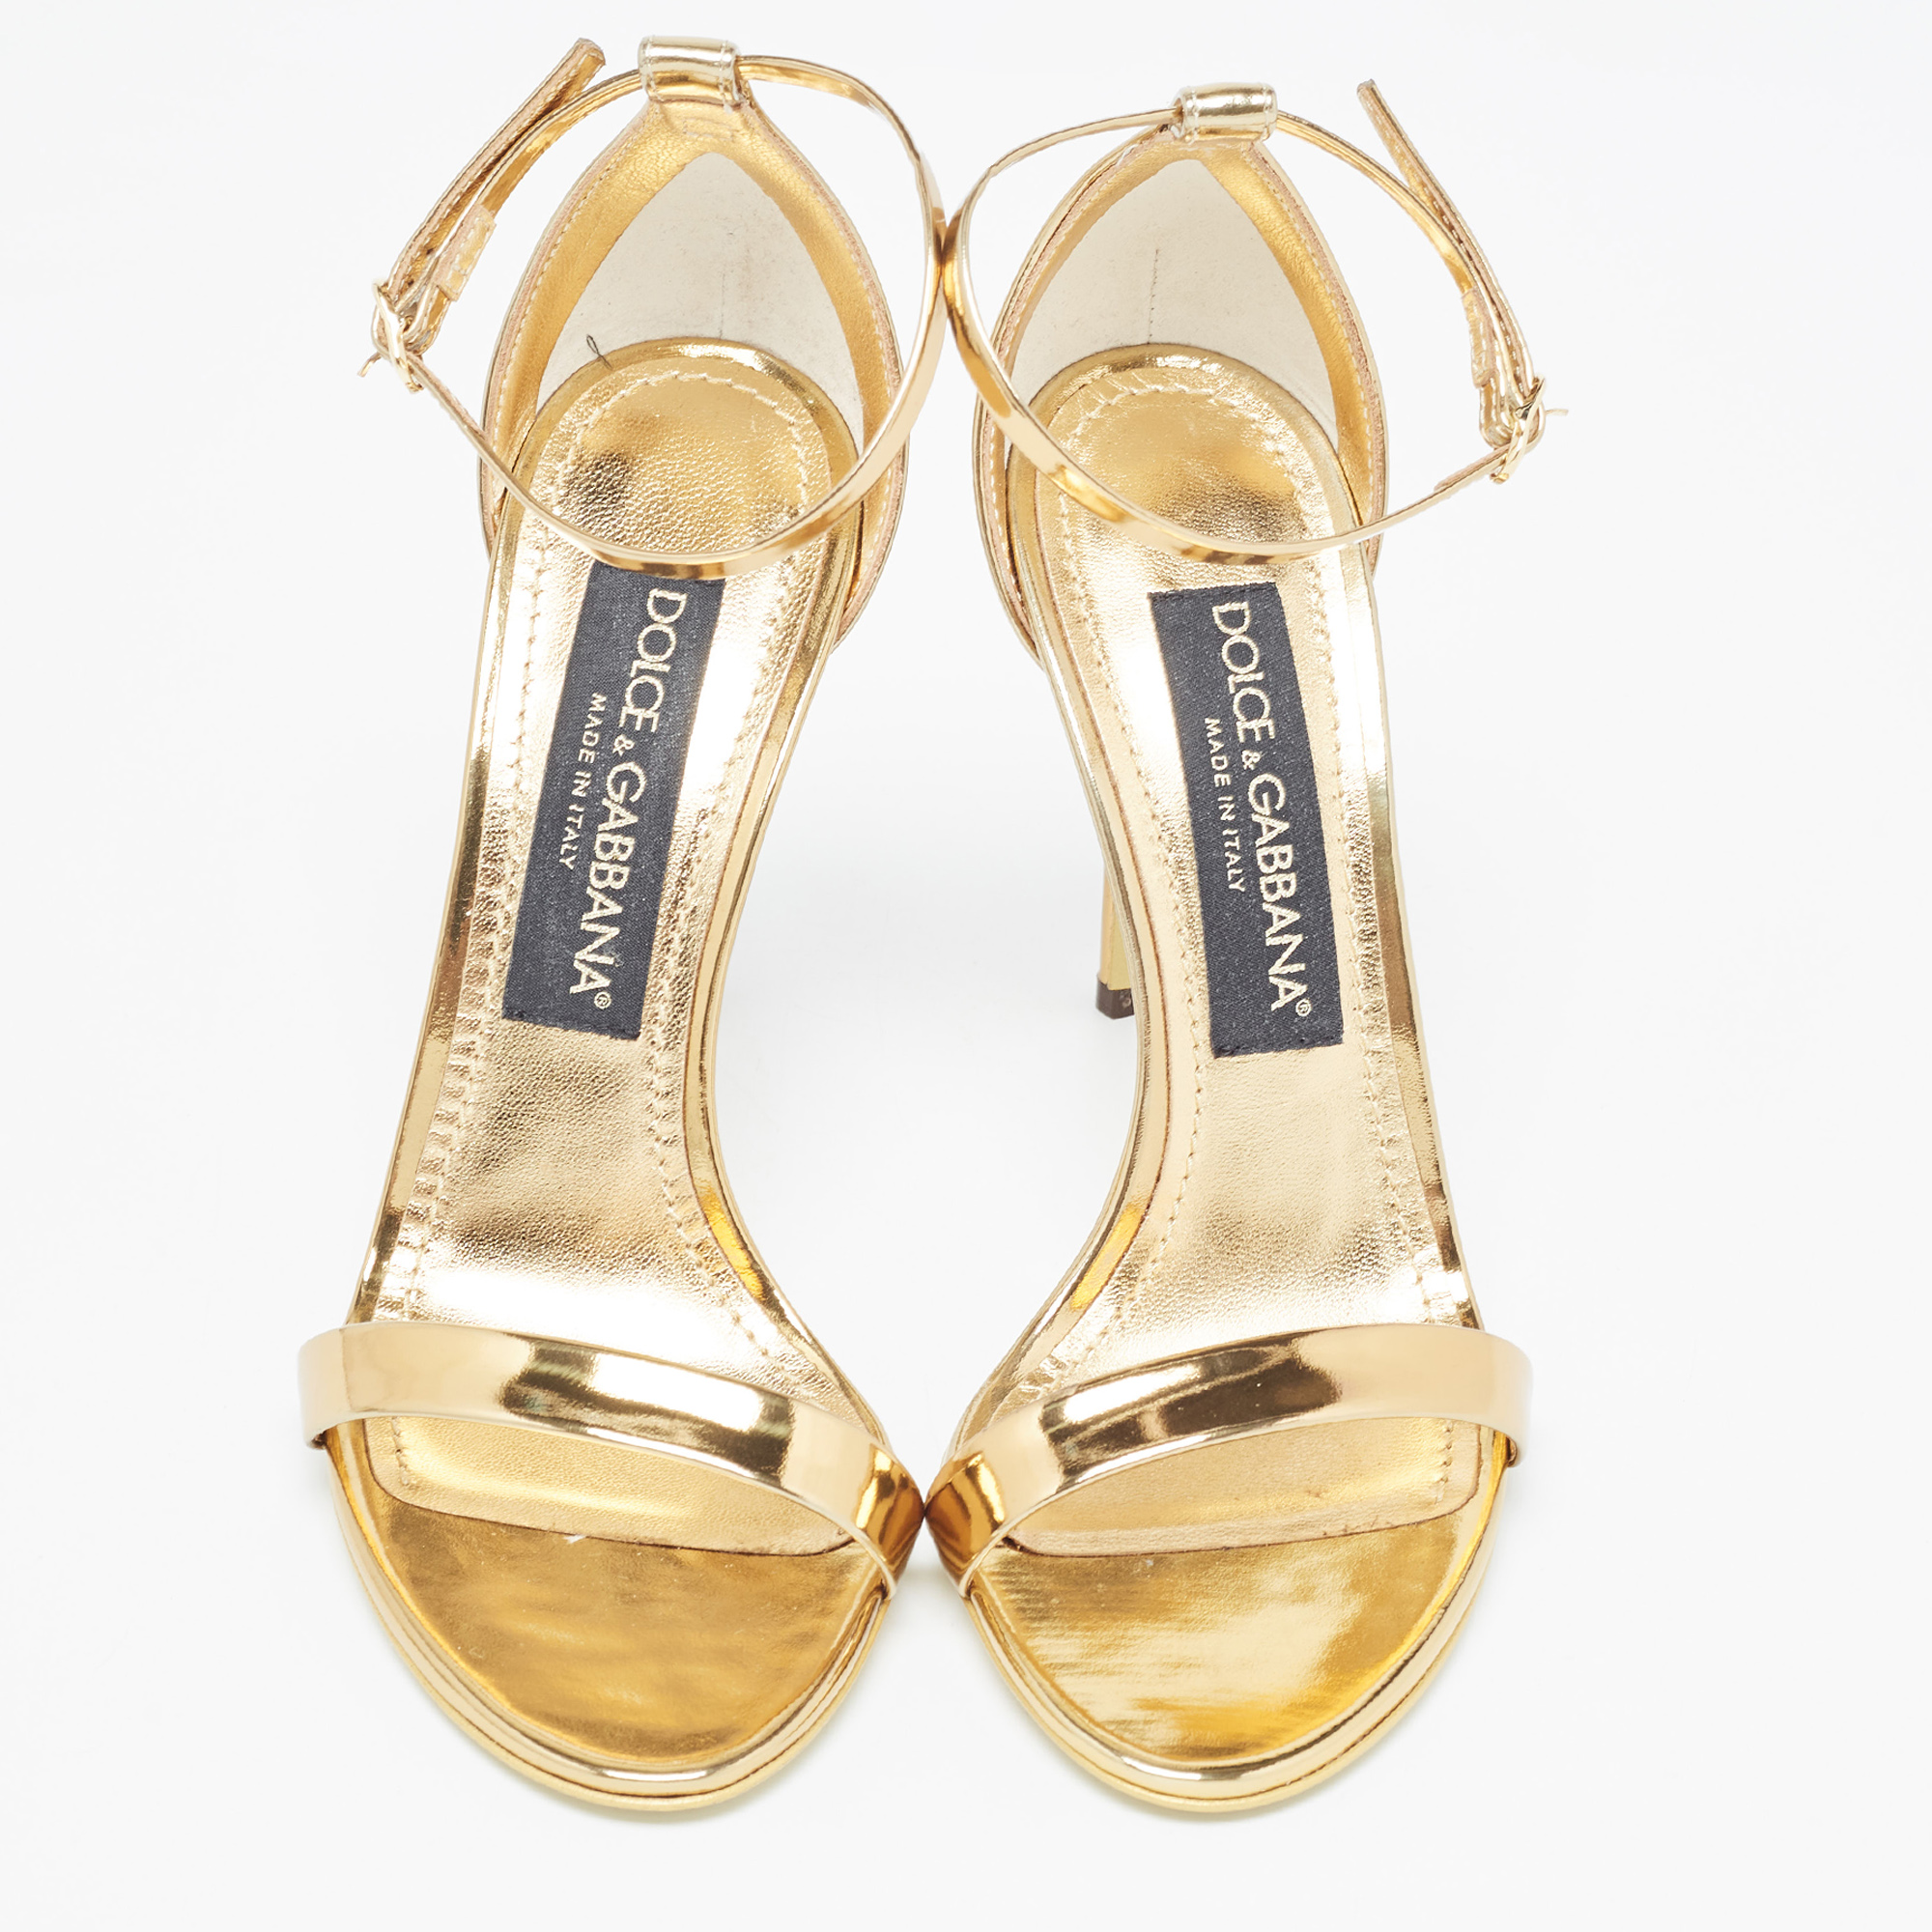 Dolce & Gabbana Gold Mirror Leather Ankle Strap Sandals Size 36